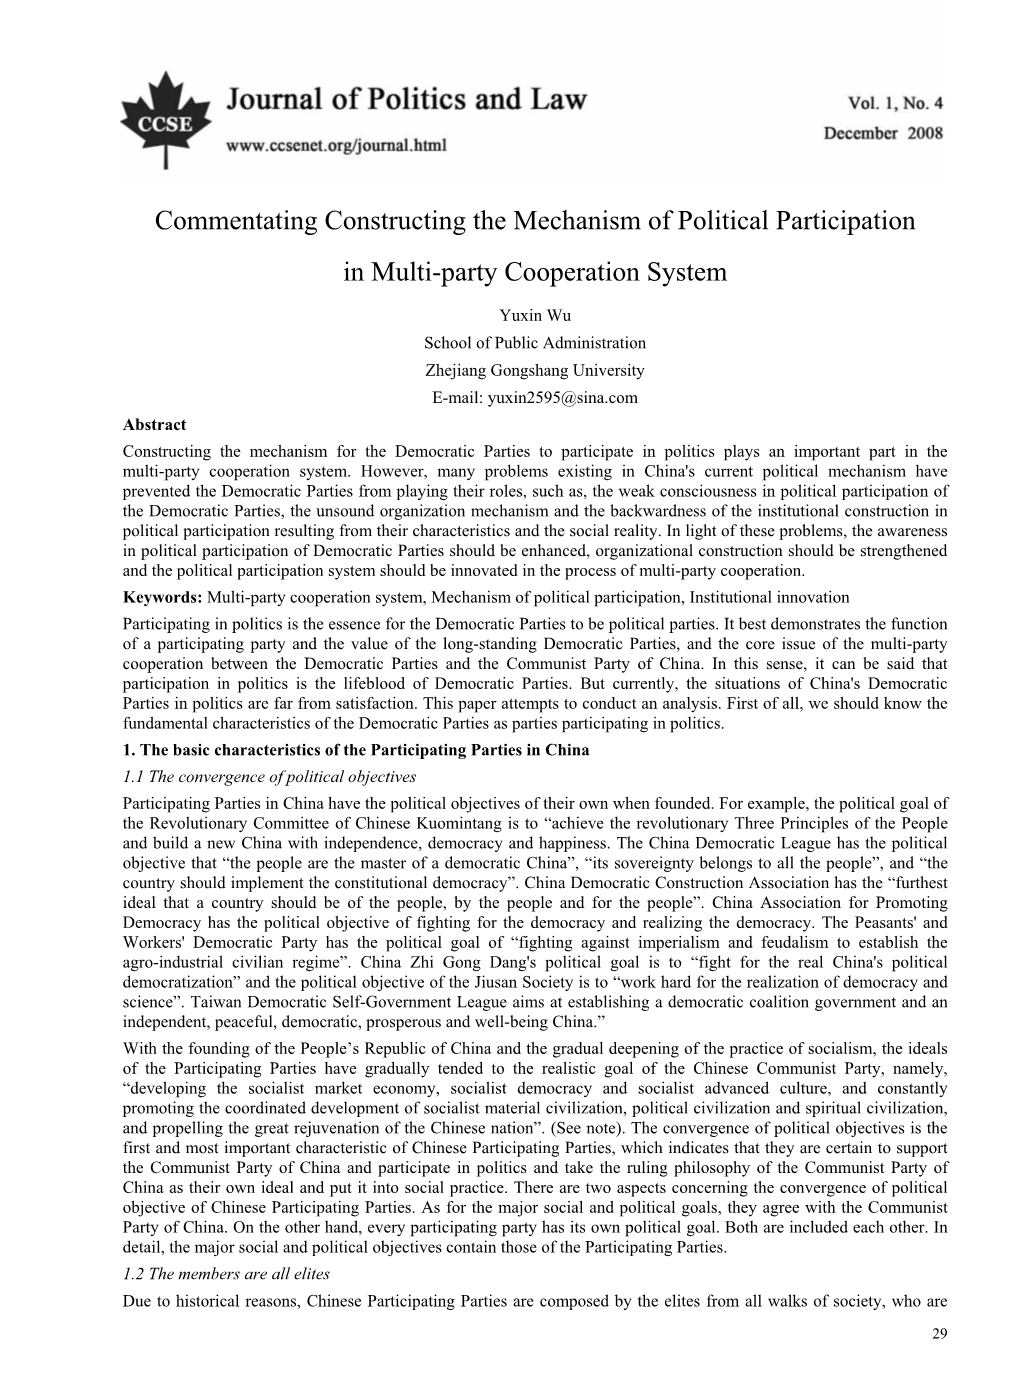 Commentating Constructing the Mechanism of Political Participation in Multi-Party Cooperation System